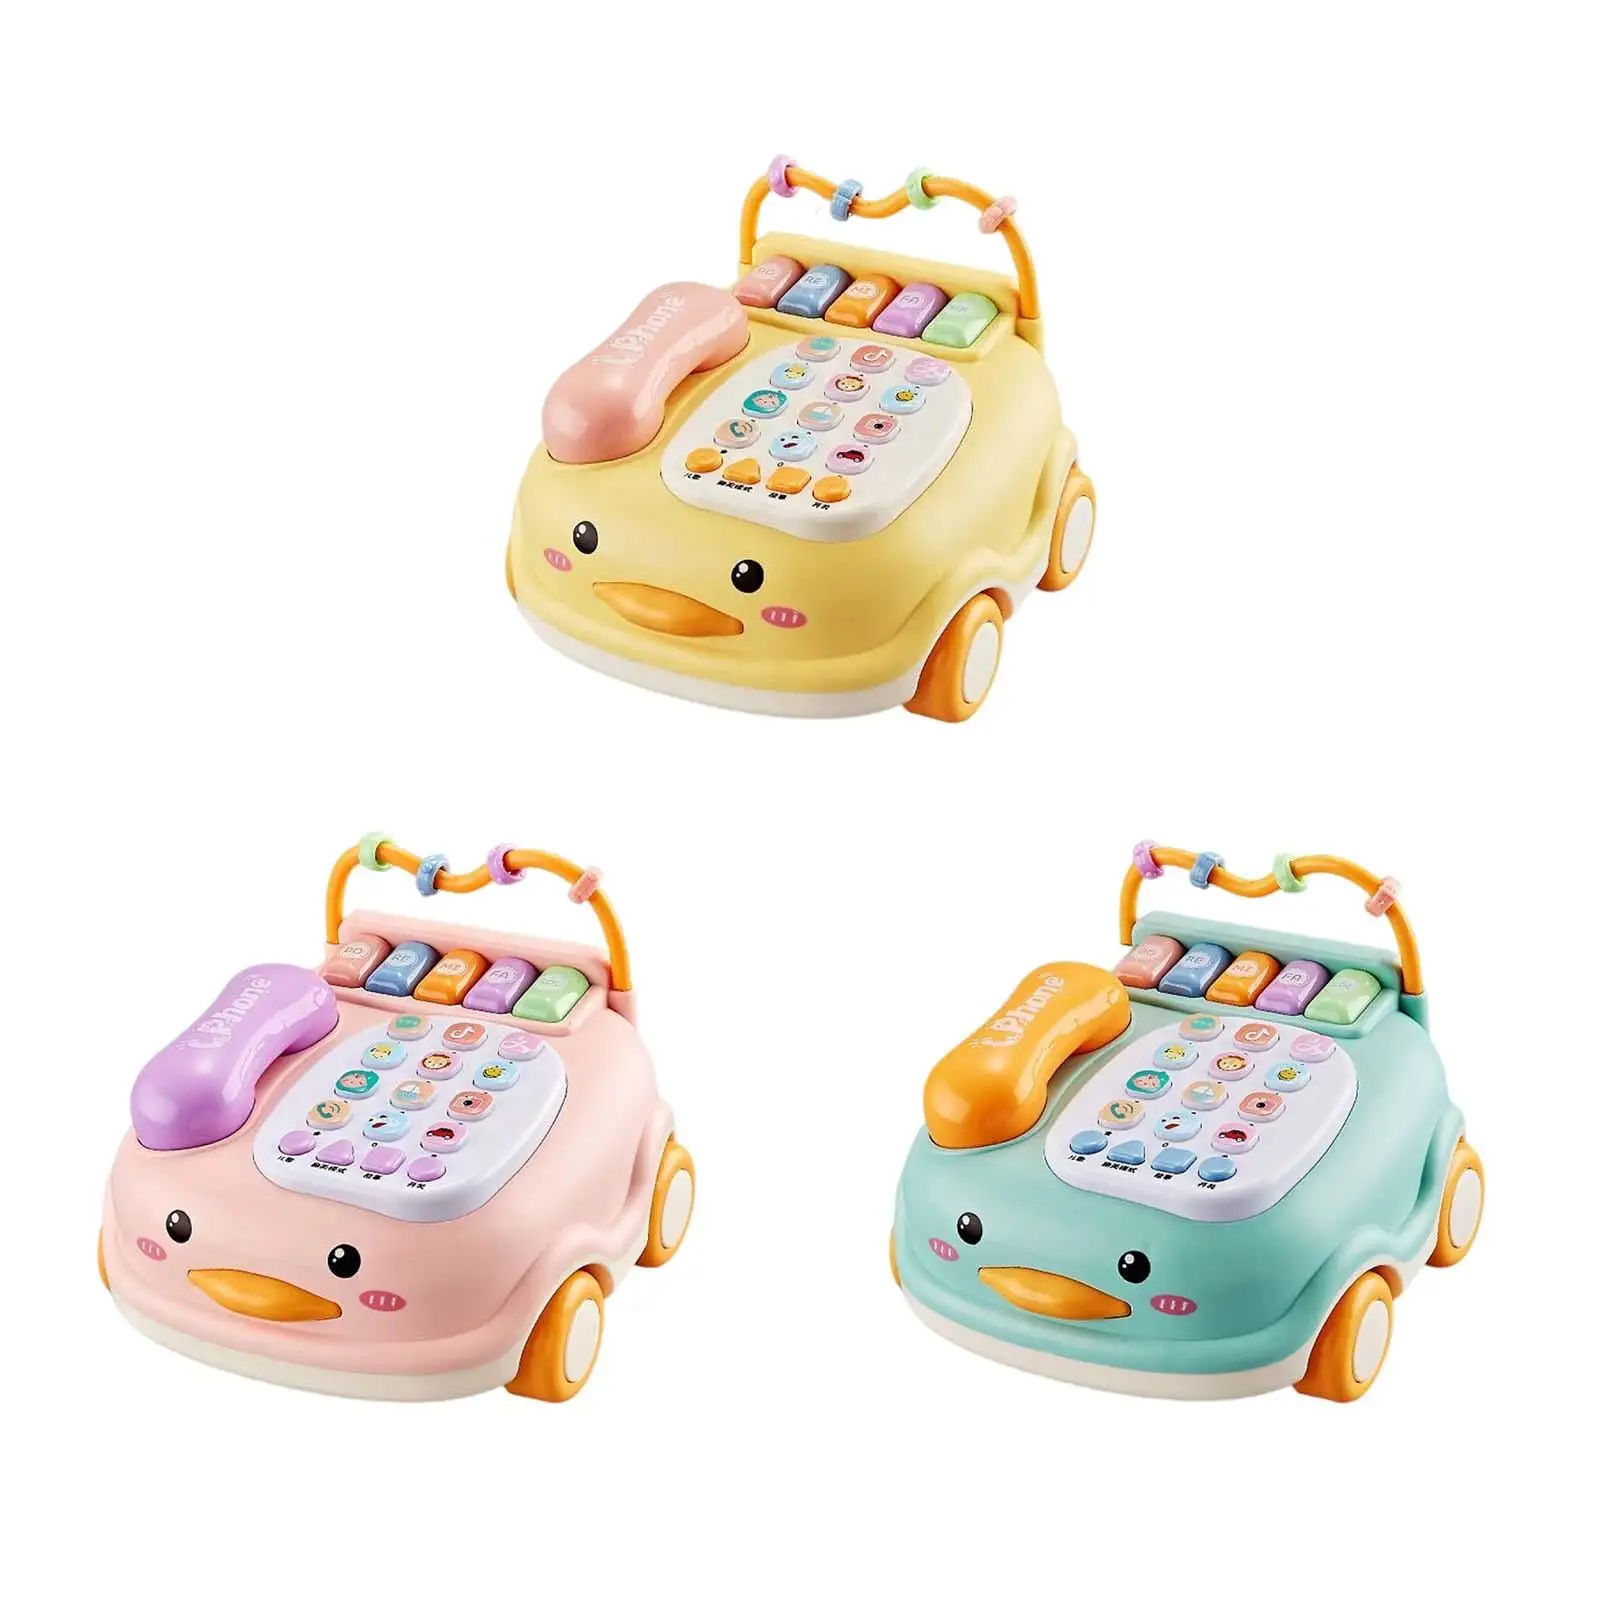 Early Learning toy Musical Piano Parent Child Interactive Toy for Boy Girl Creative Gift Early Education Gift Children